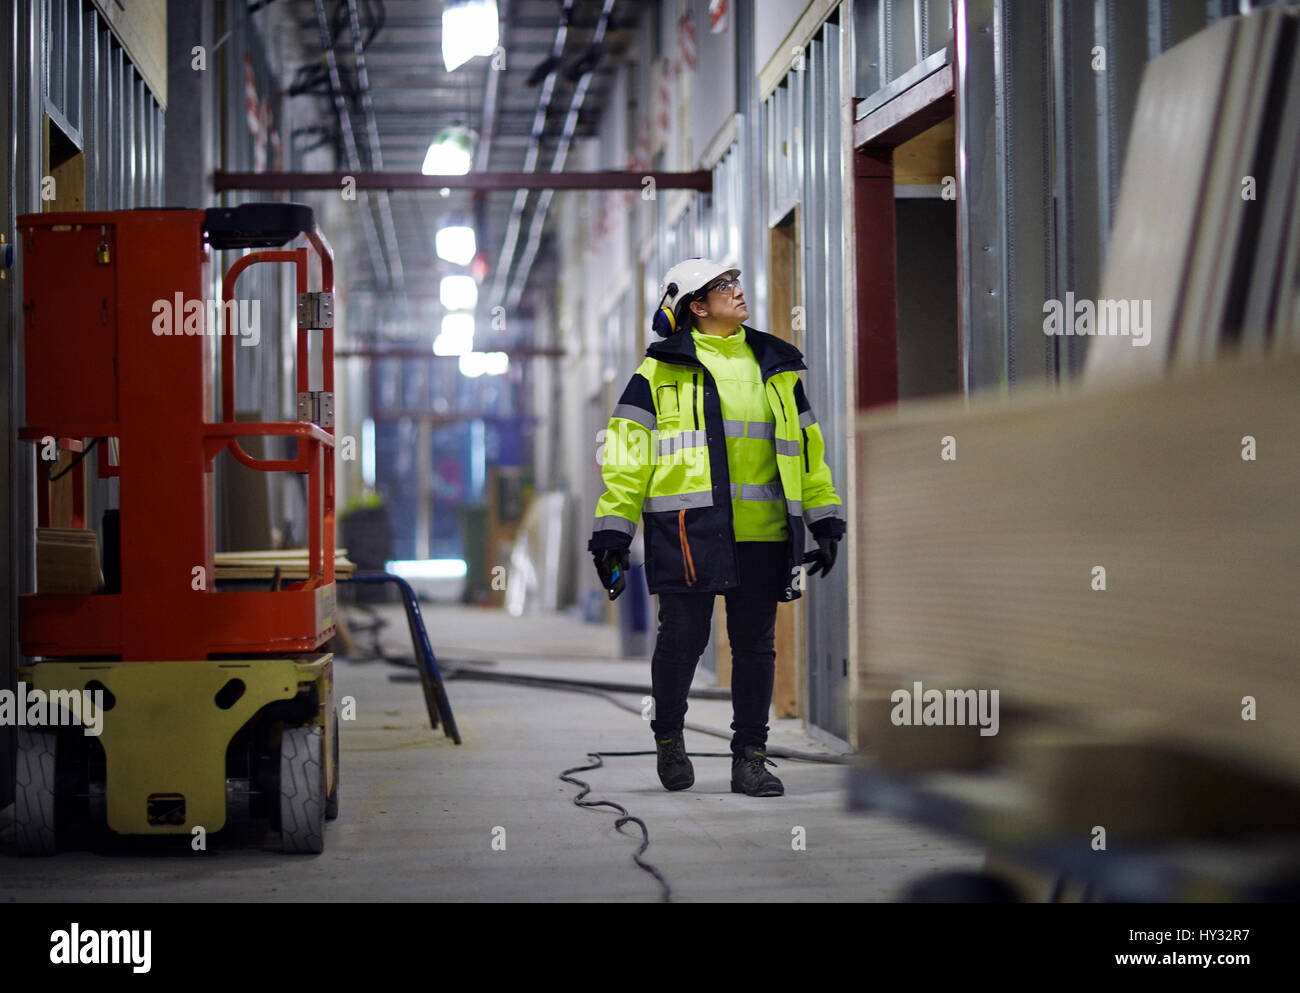 Sweden, Woman in protective clothing walking Stock Photo